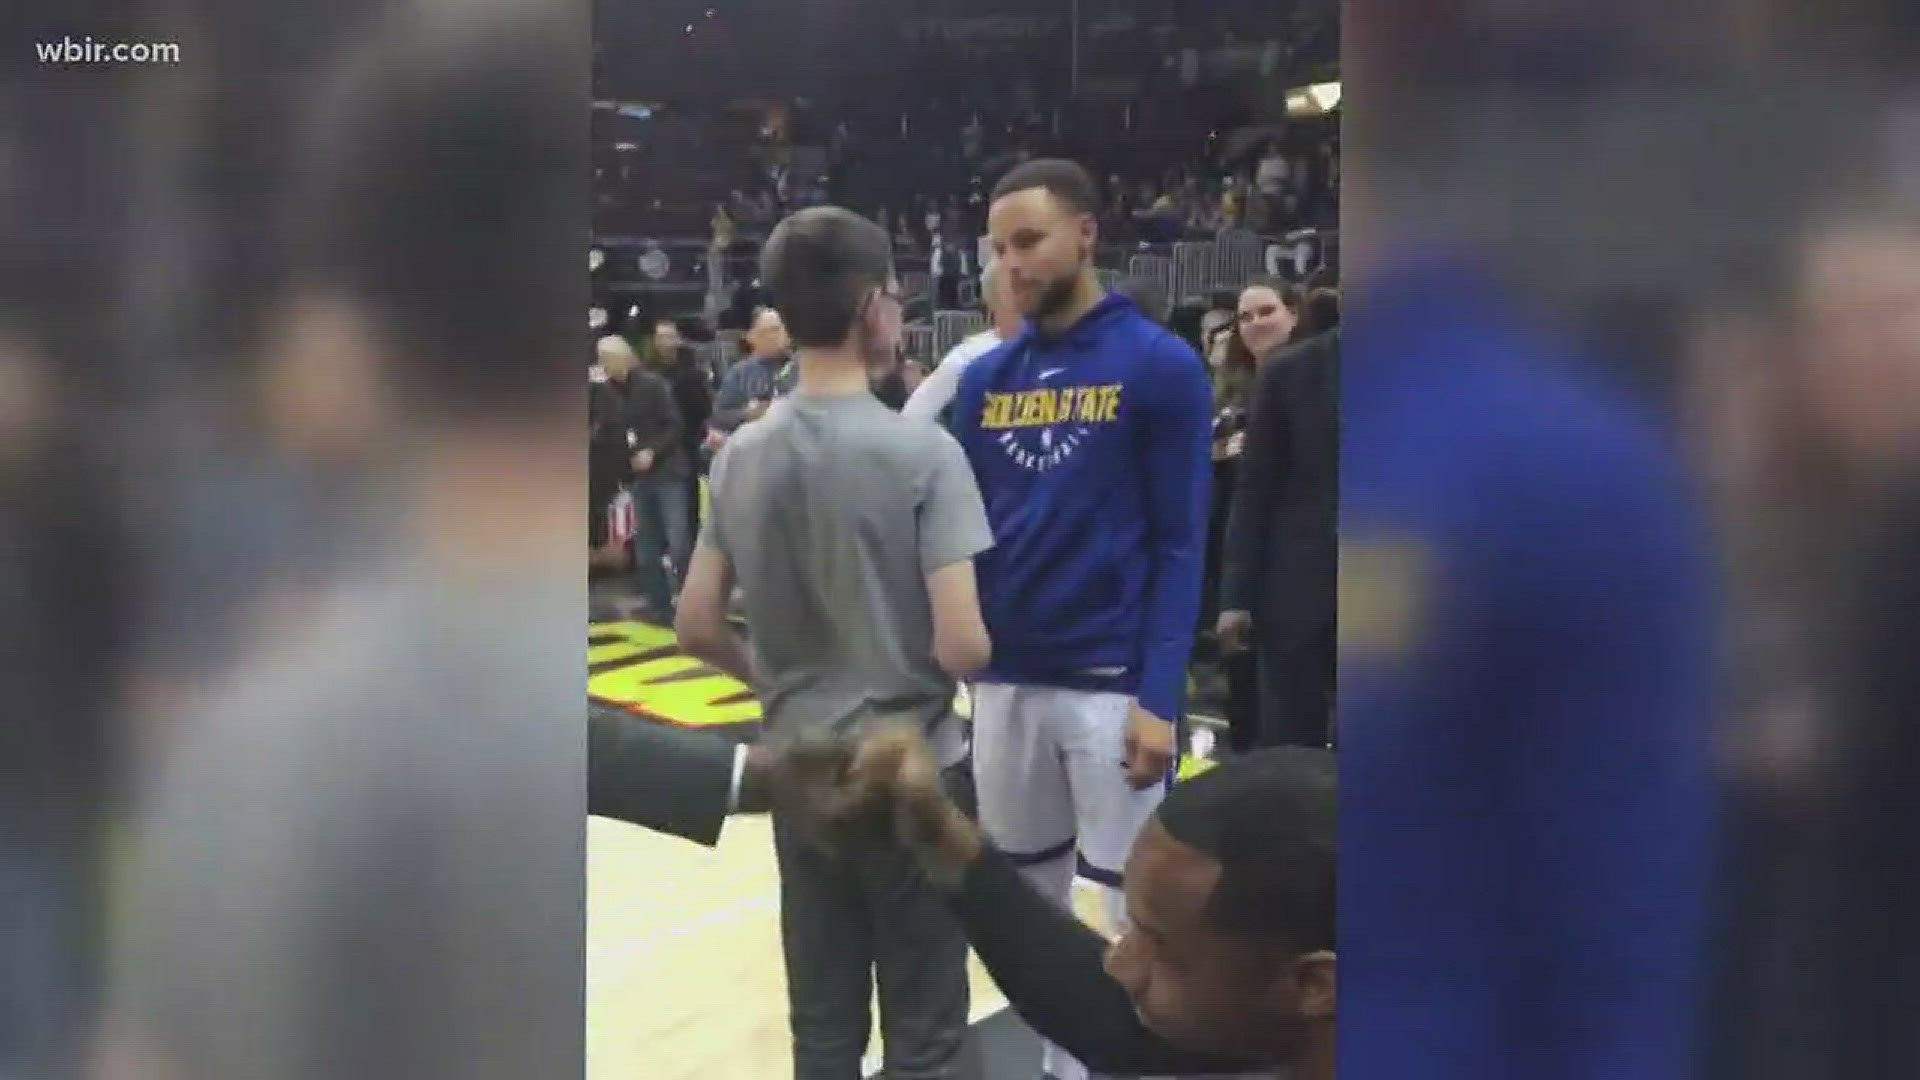 An East Tennessee boy living with a rare bone disease saw his dream come true this week. He met his role model and favorite basketball player ever. Steph Curry!